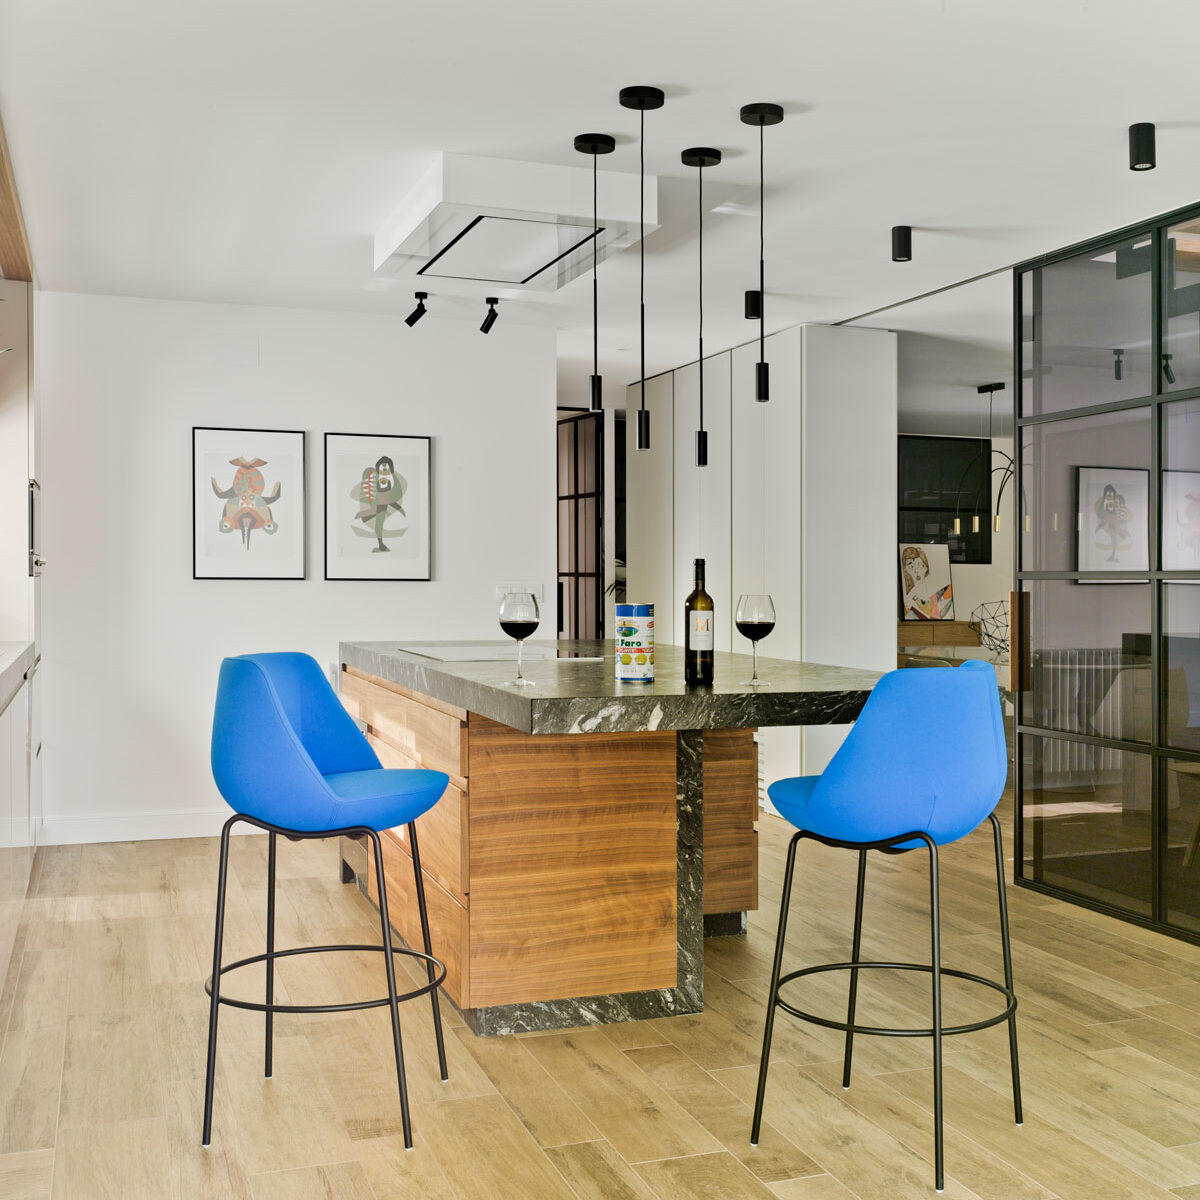 Kitchen Trends 2021 The Barstool, On Trend Bar Stools 2021